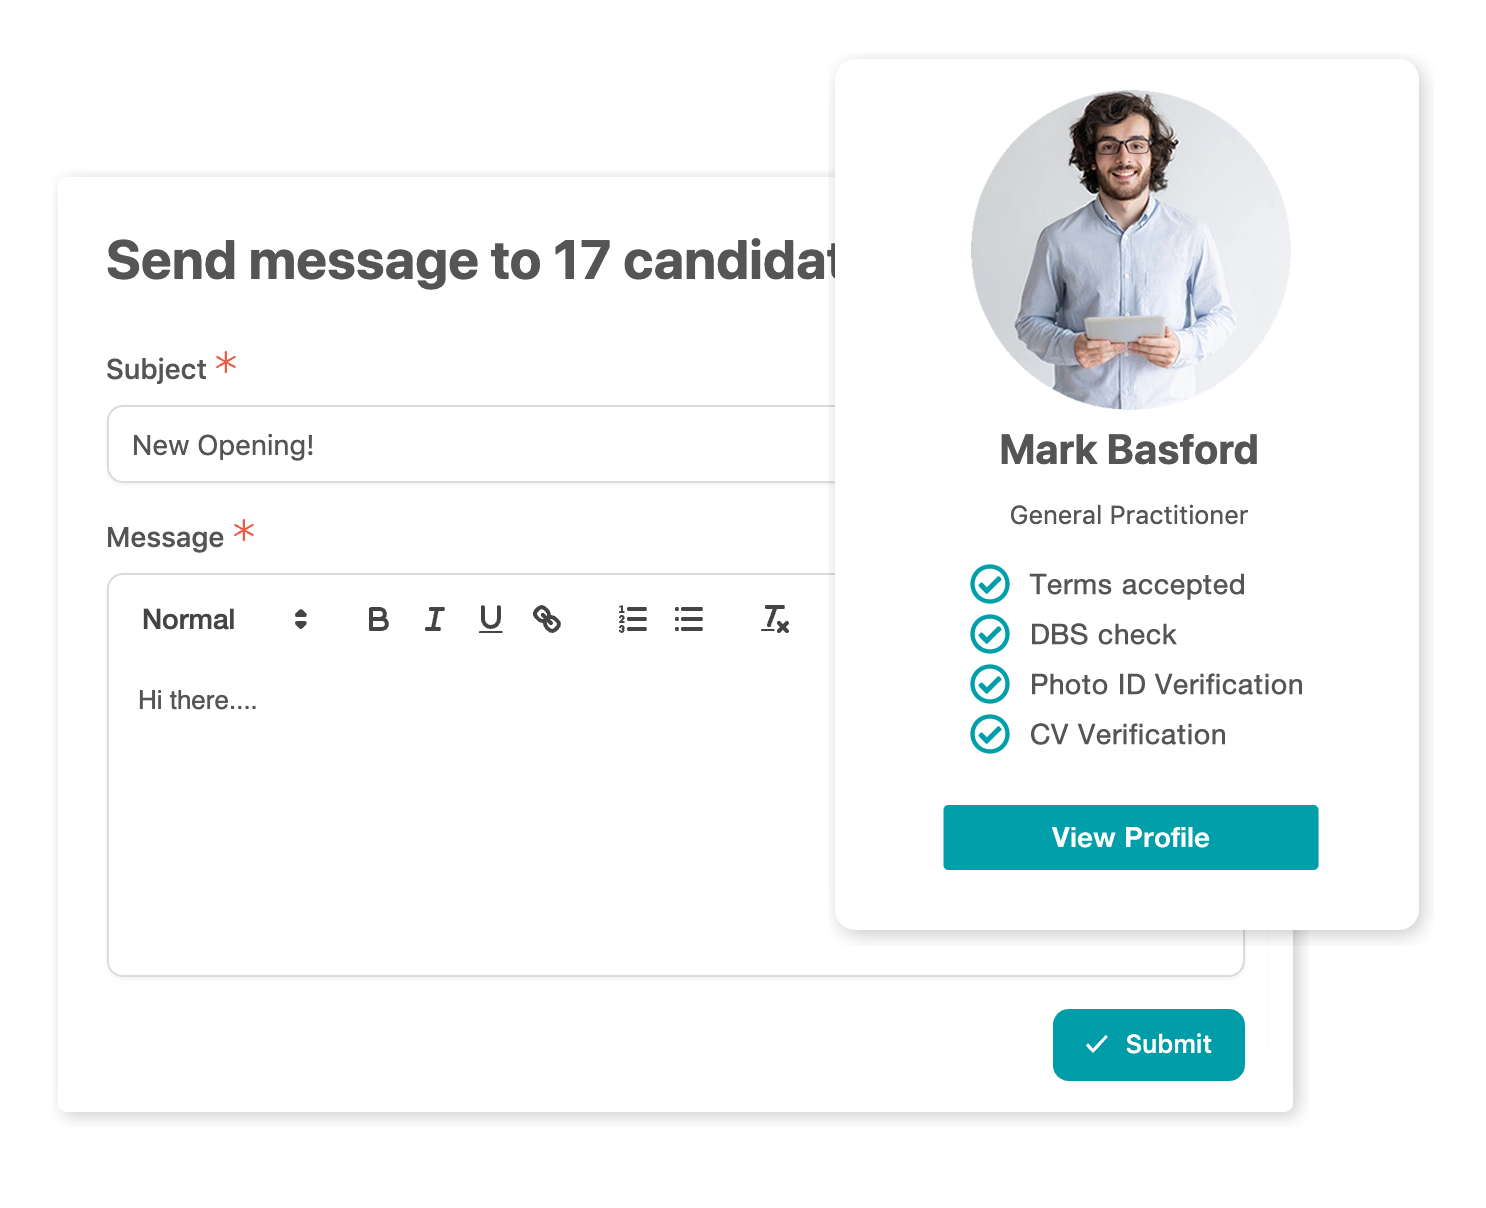 Want to send a message to multiple candidates? No problem